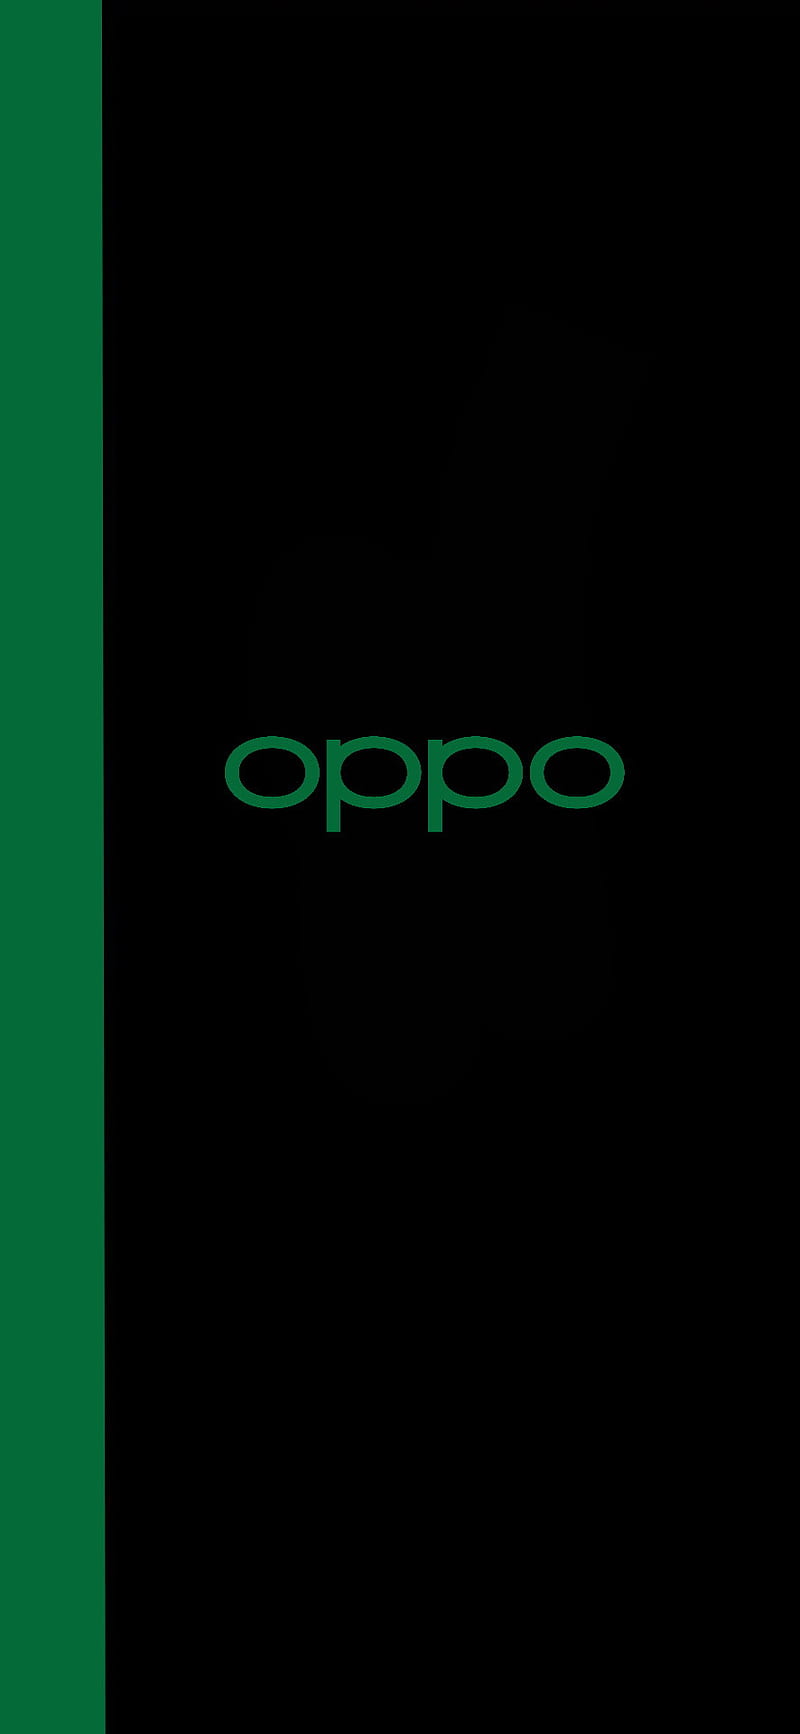 Oppo Logo 2019 Download png